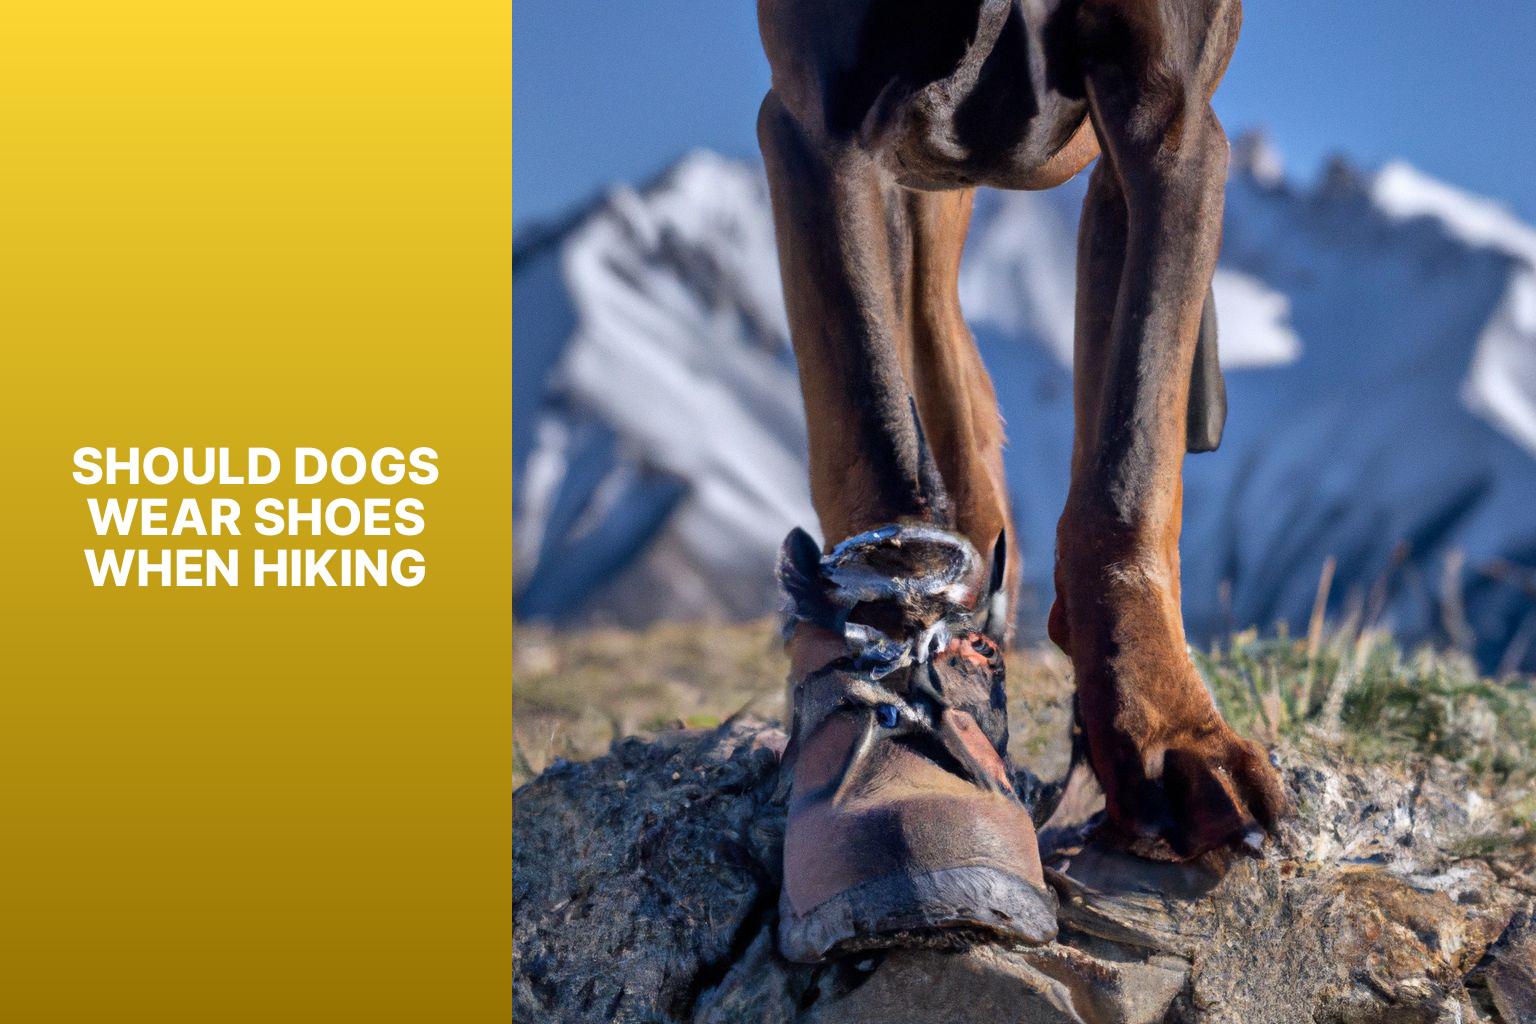 should dogs wear shoes when hiking6mee